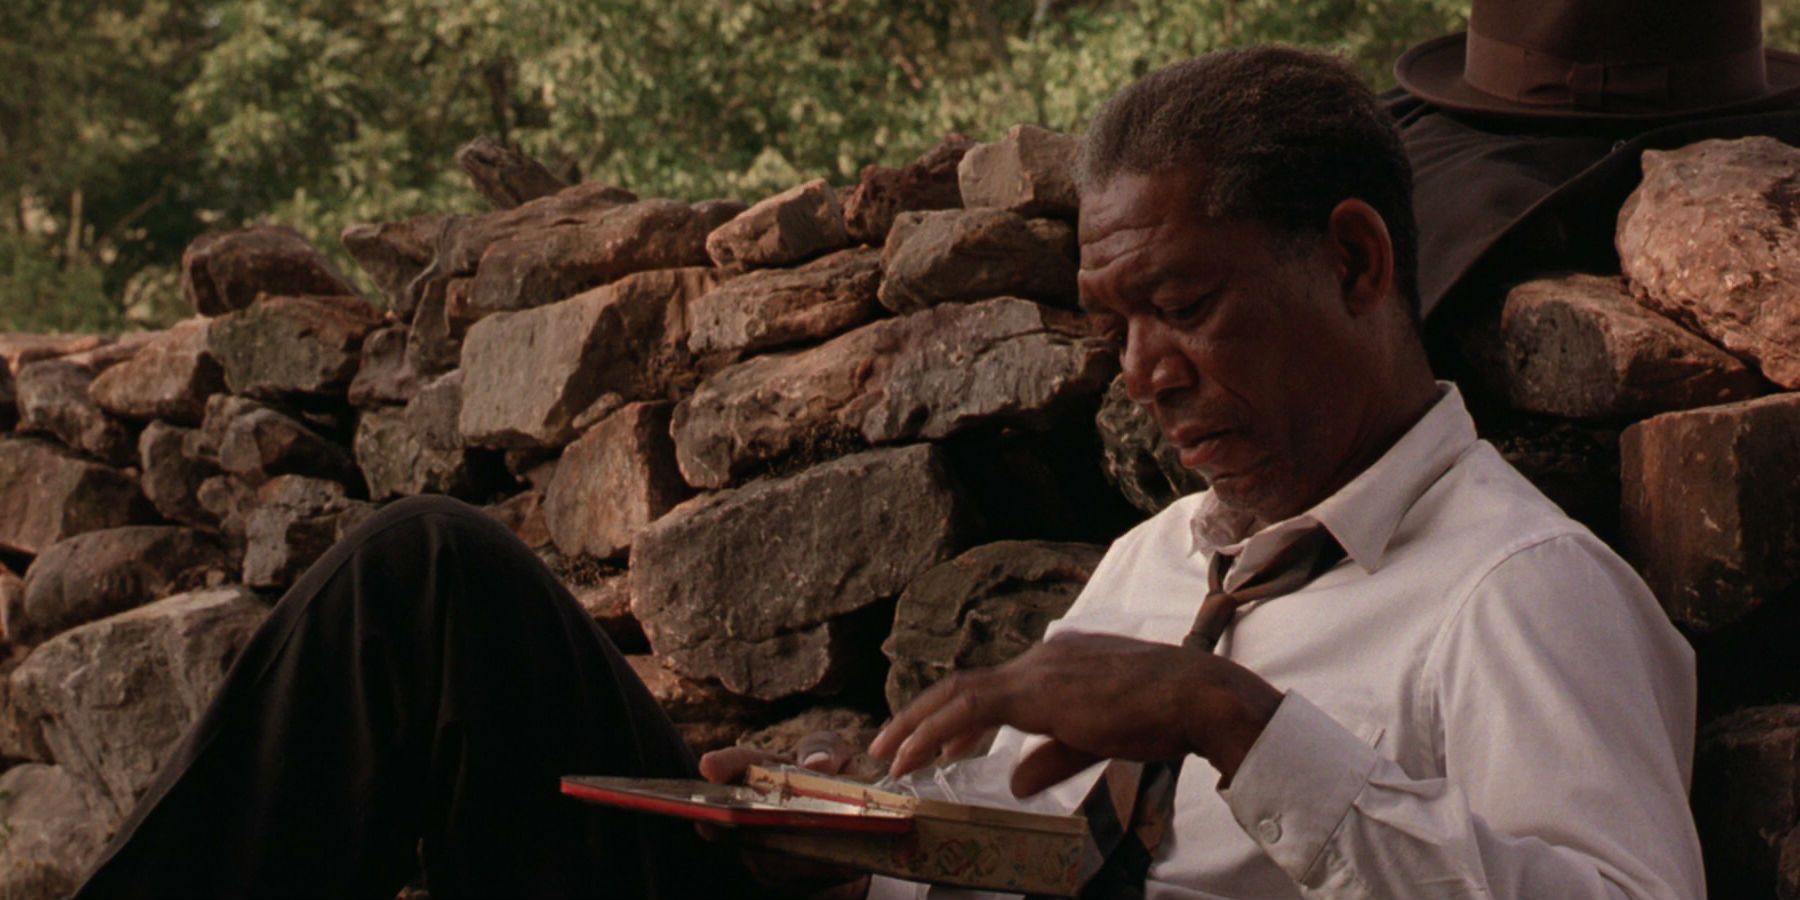 Morgan Freeman looking at a box in The Shawshank Redemption